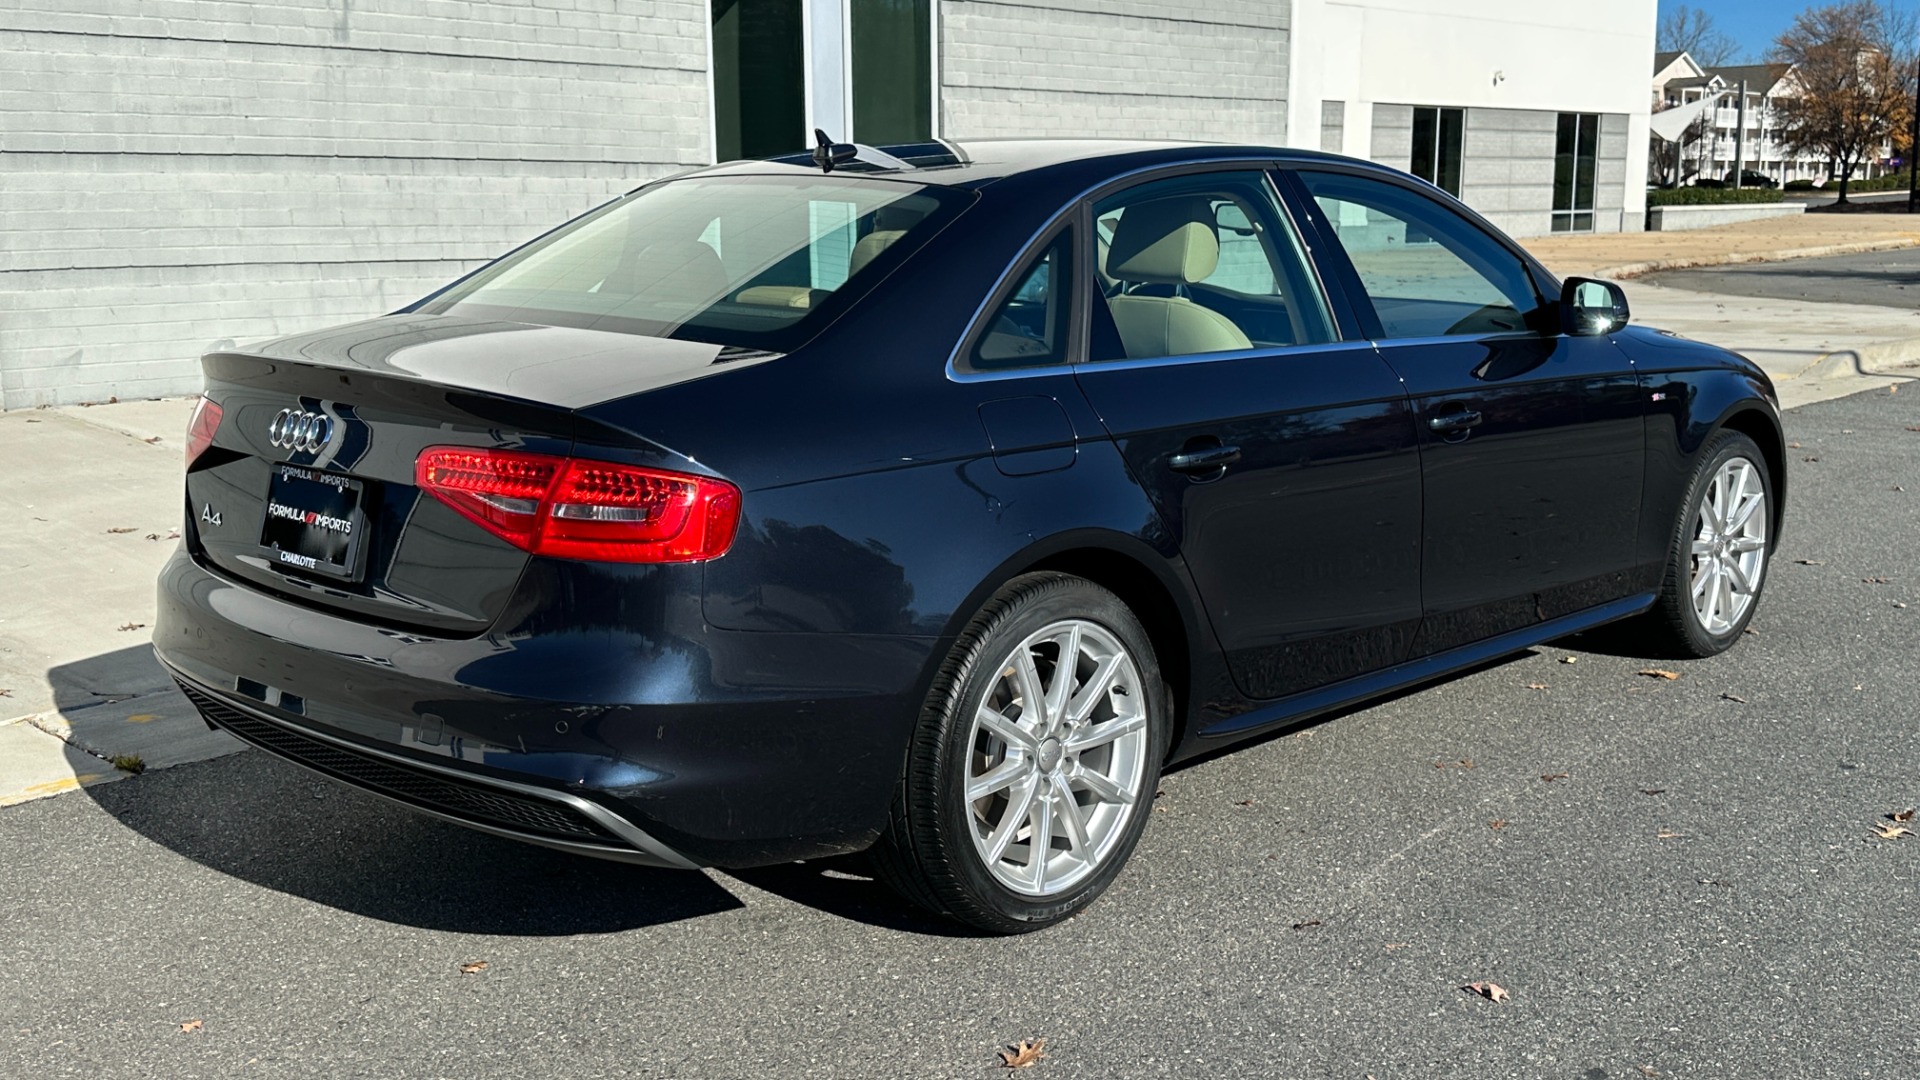 Used 2014 Audi A4 PREMIUM PLUS / NAVIGATION PLUS / BLINDSPOT ASSIST / LEATHER / SUNROOF for sale $19,298 at Formula Imports in Charlotte NC 28227 5